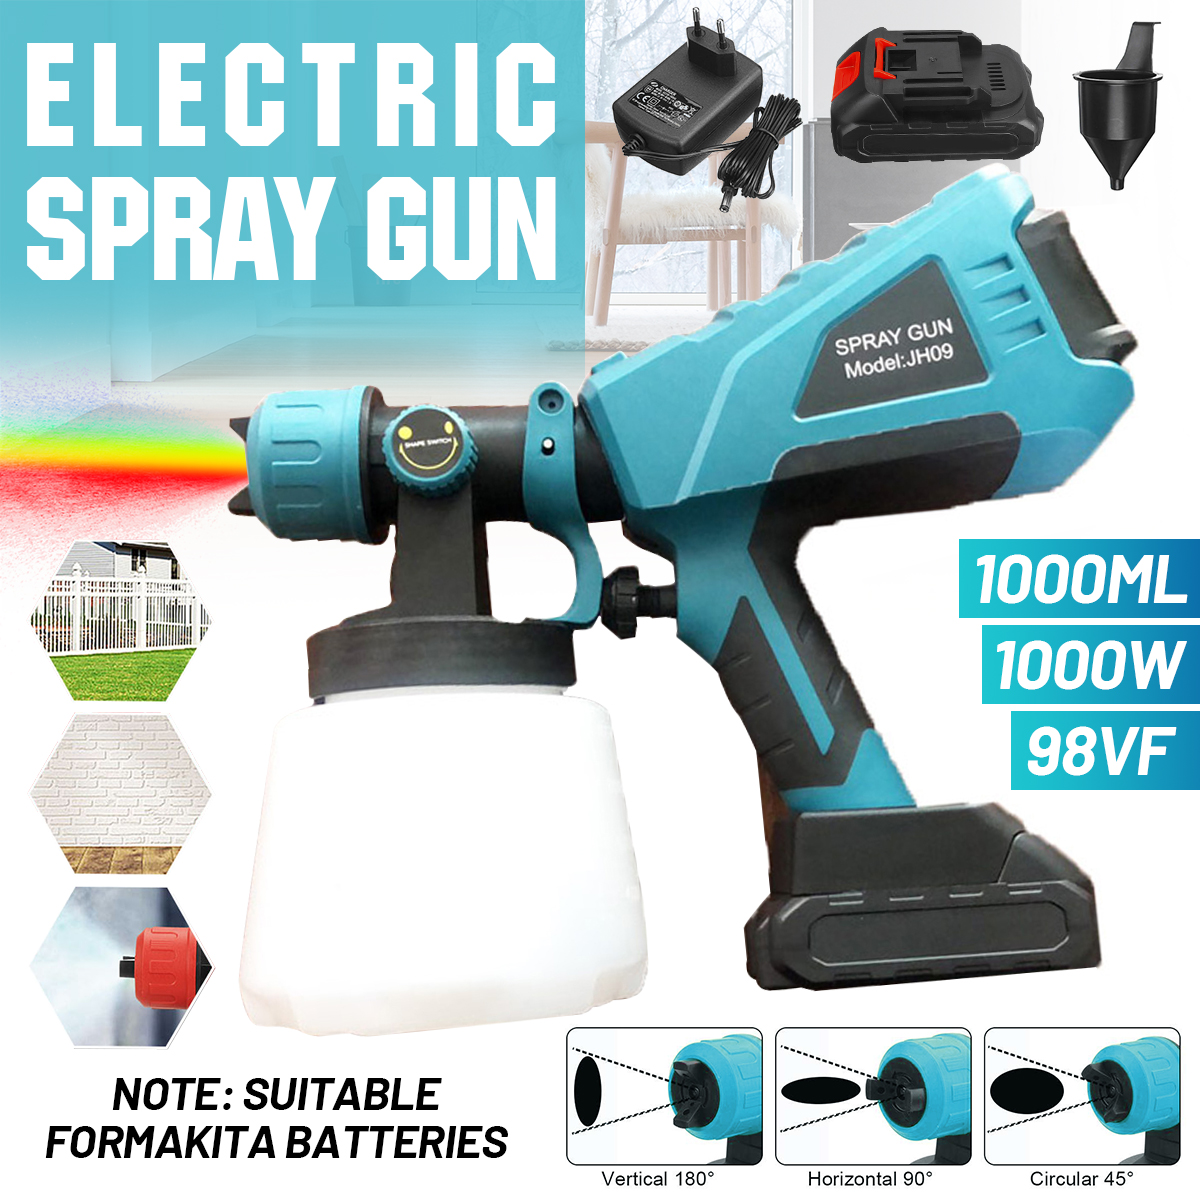 1000W-Paint-Tool-Paint-Sprayer-Guns-with-1000ml-Container-Spraying-Cleaning-Tool-Fit-Makita-1881632-1